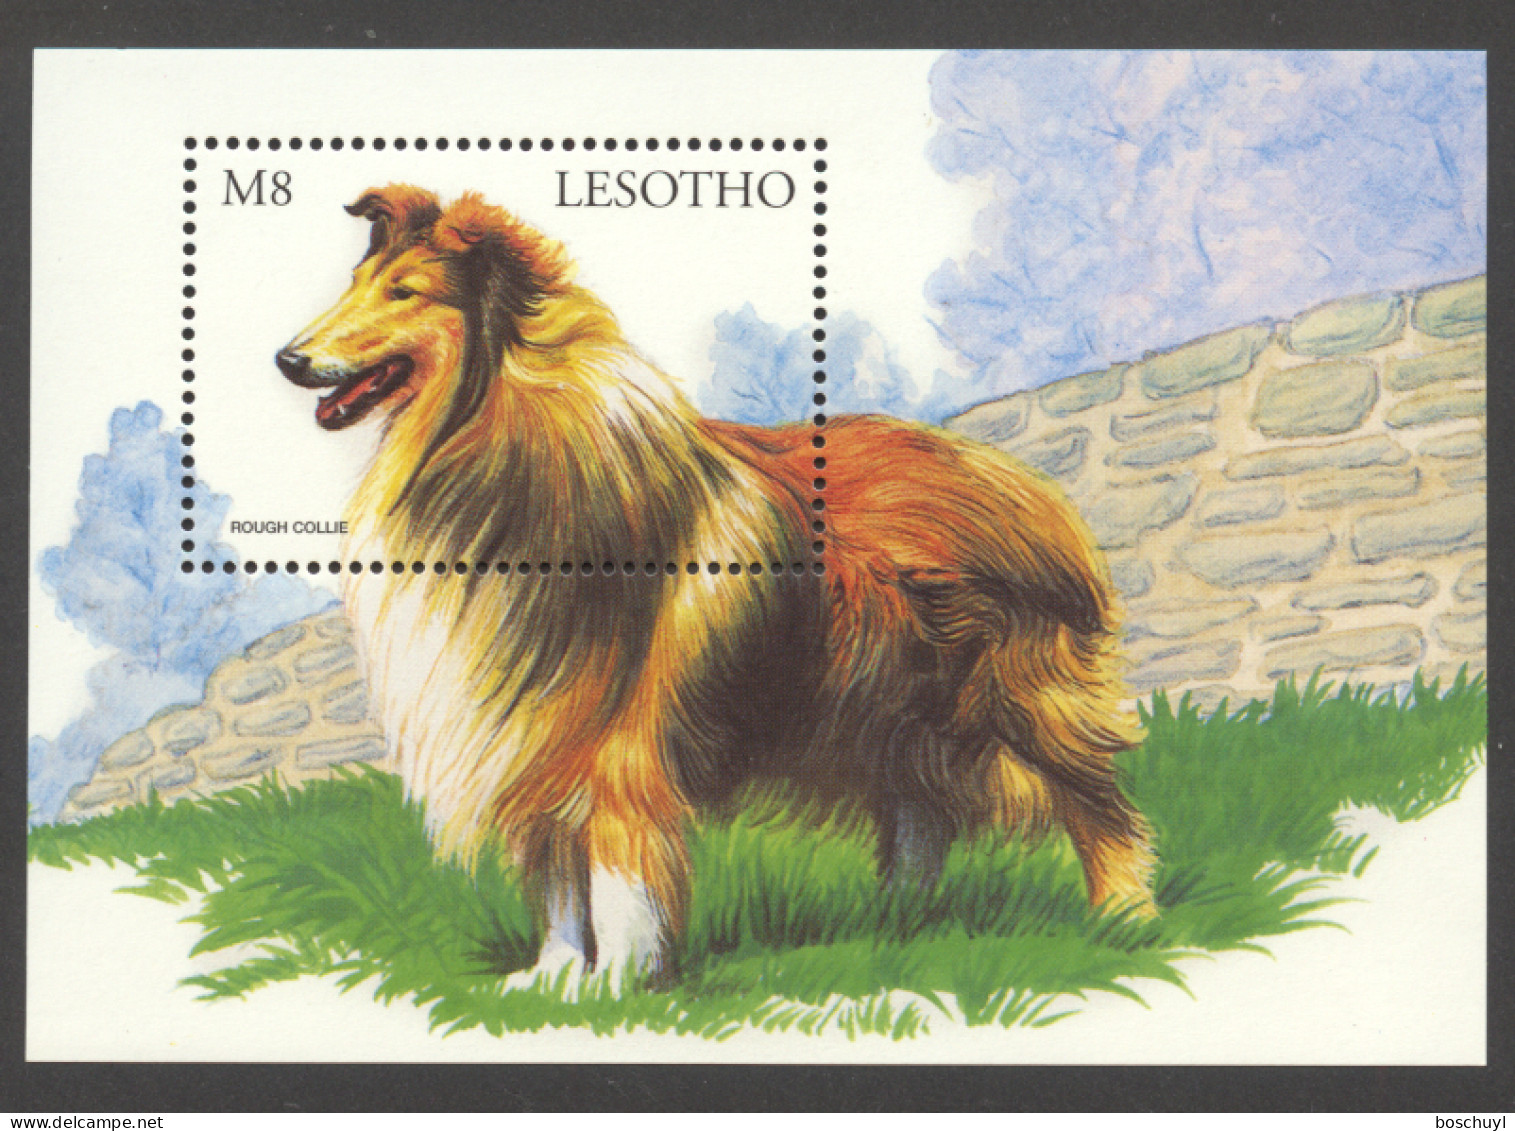 Lesotho, 1999, Dogs, Rough Collie, Animals, MNH, Michel Block 133 - Lesotho (1966-...)